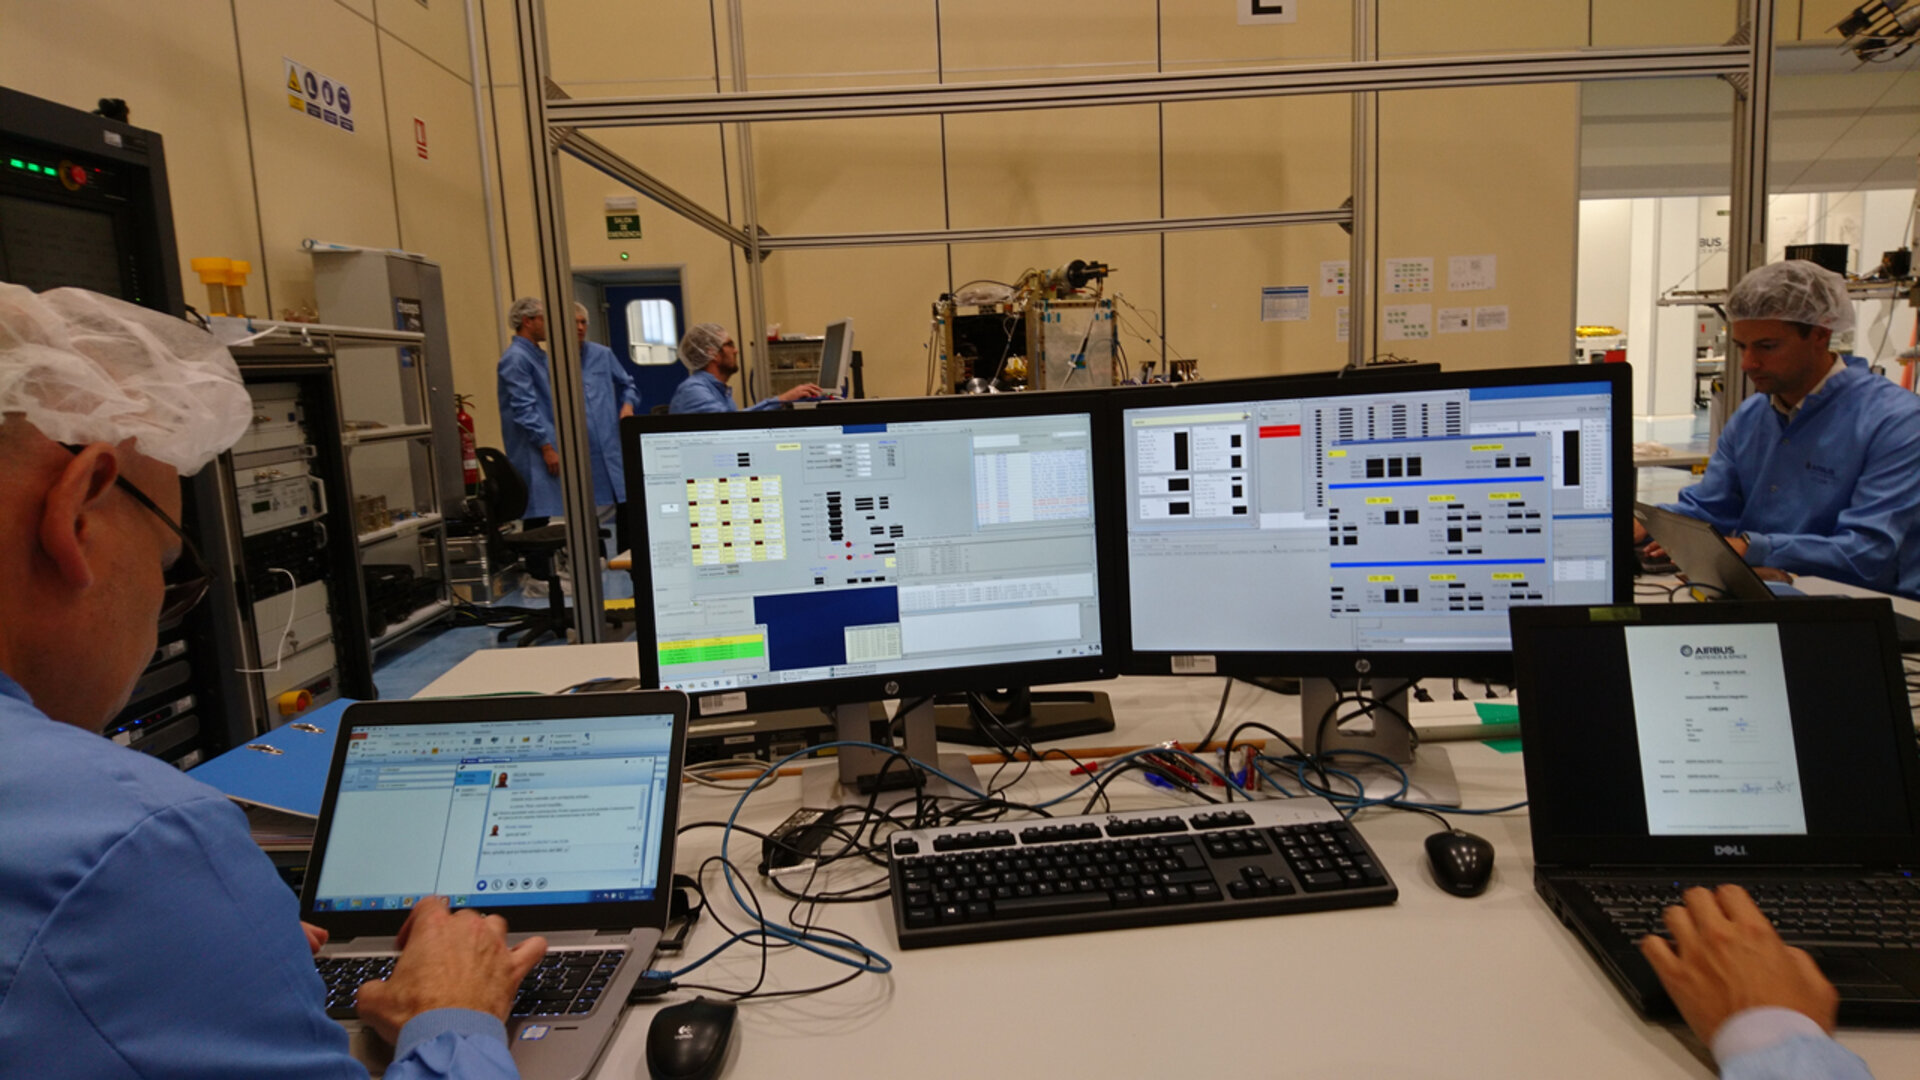 Controlling the CHEOPS instrument during interface testing